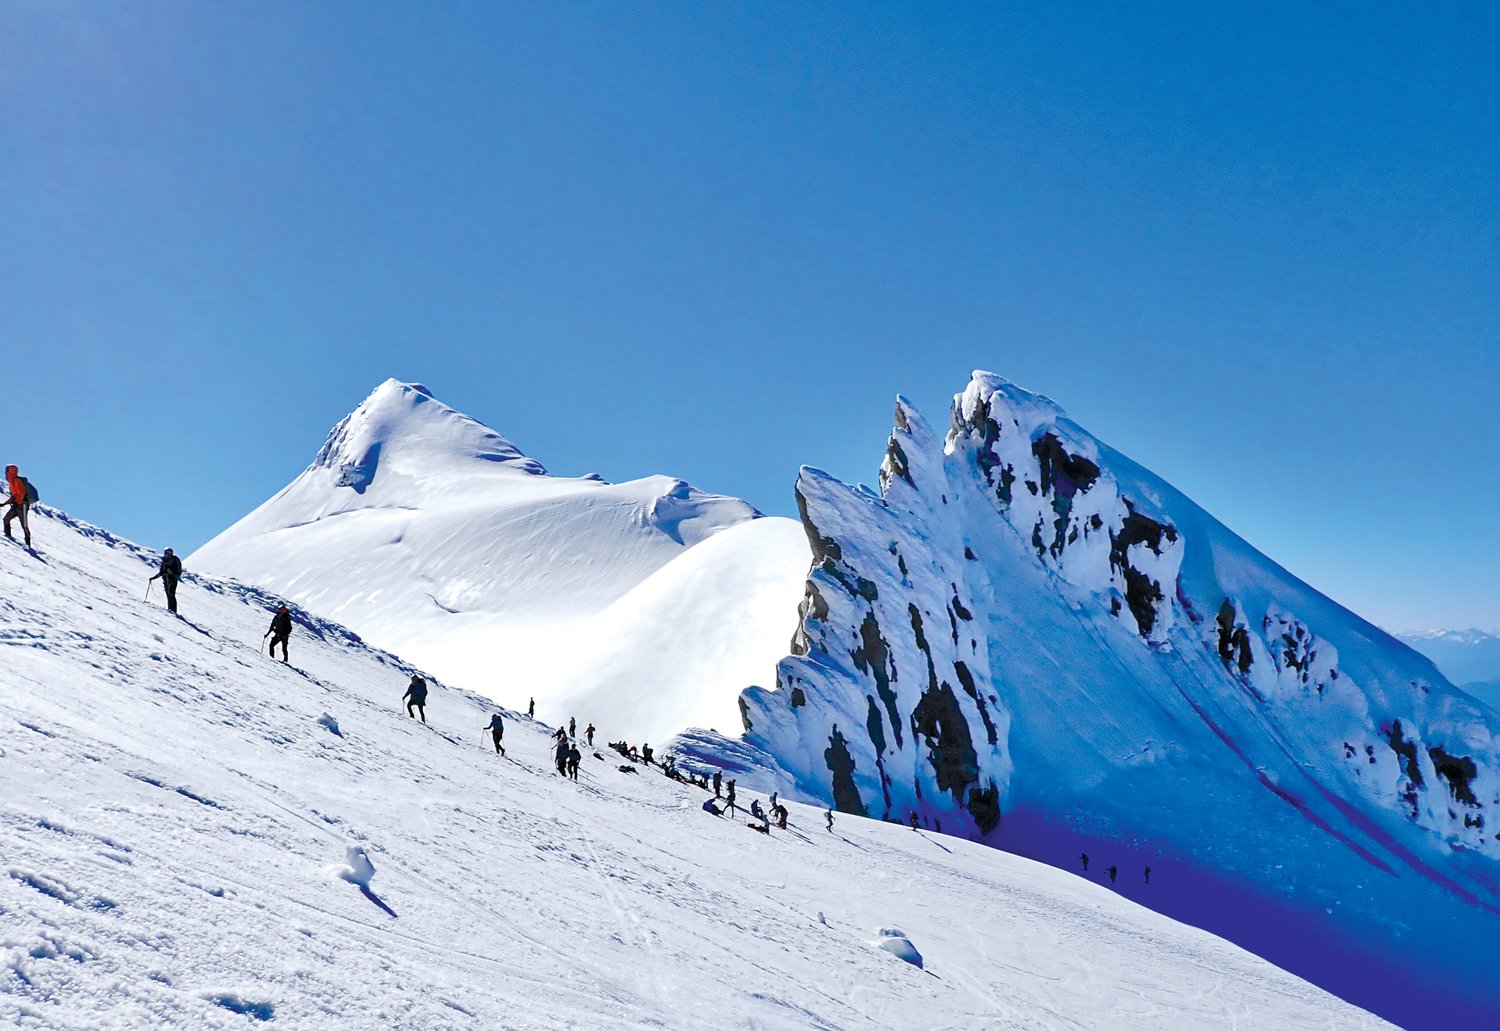 Climbers walk with poles along the snowy slopes of Mount Baker.